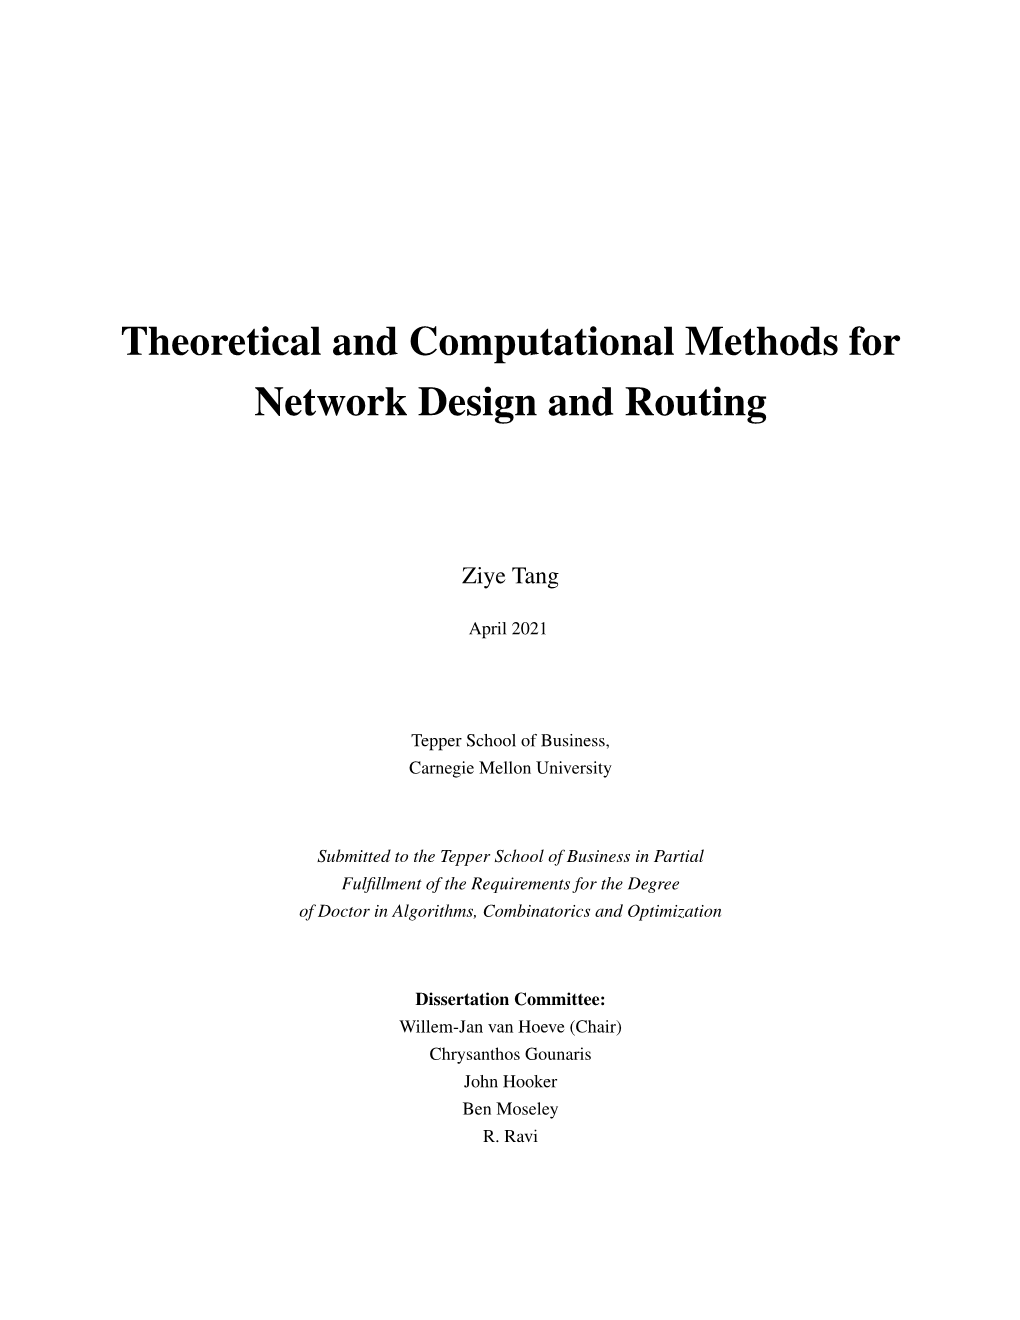 Theoretical and Computational Methods for Network Design and Routing